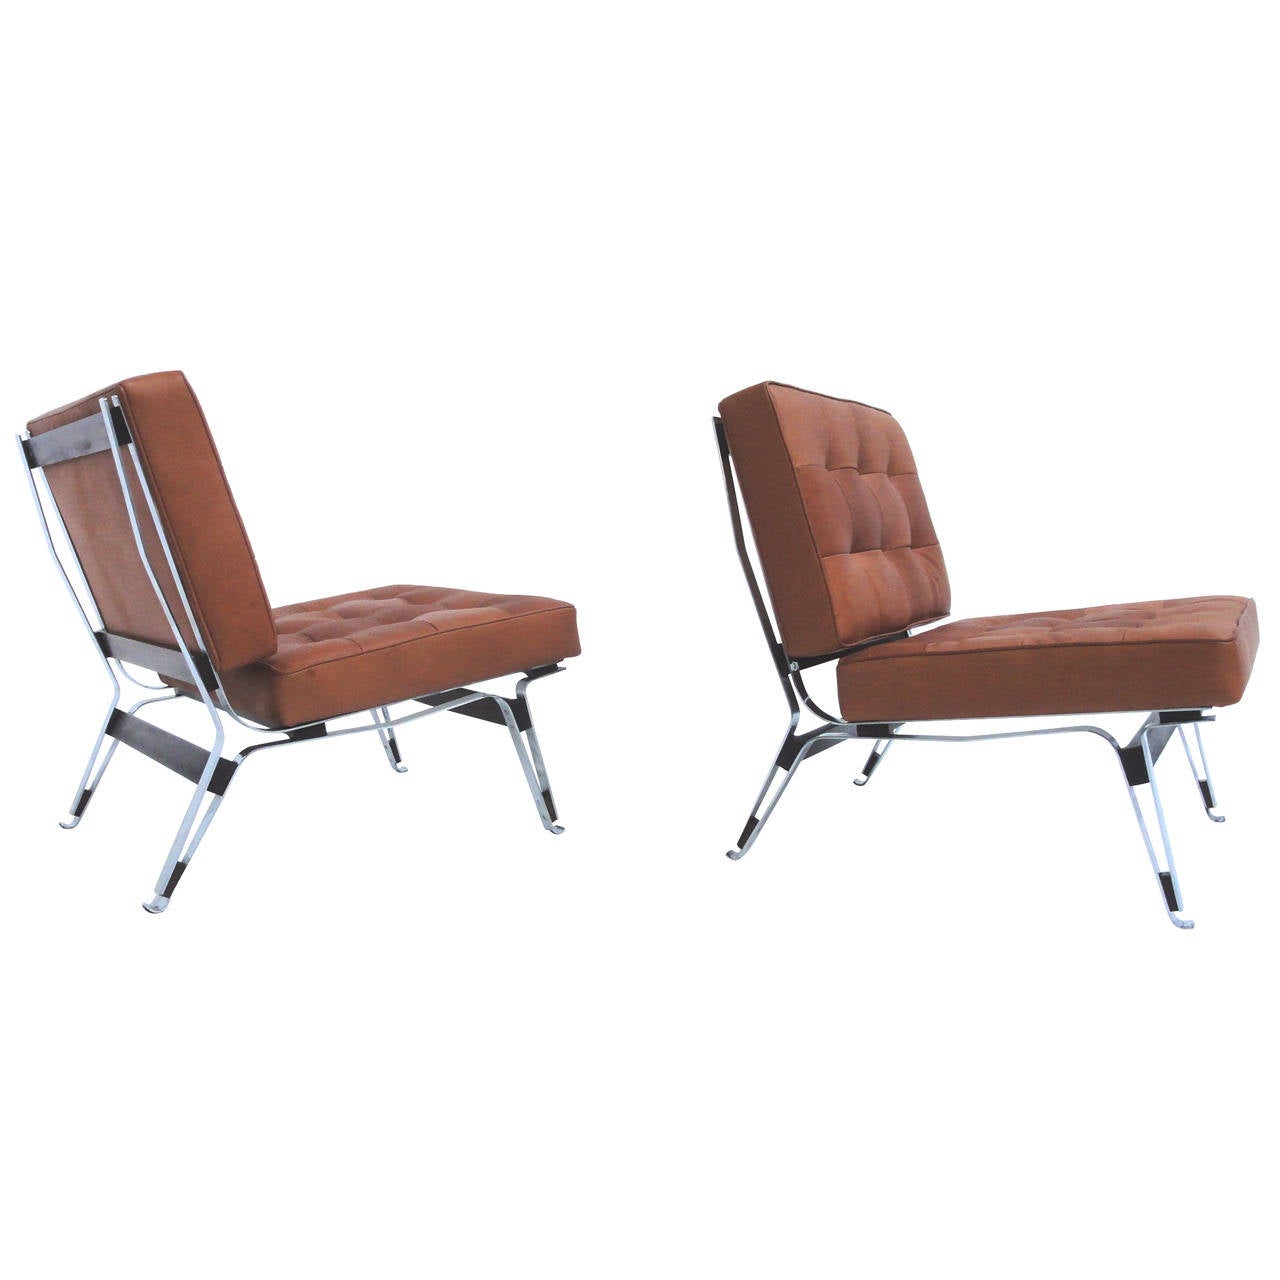 Lovely and important pair of original 1957 Ico Parisi “856” lounge chairs finished in high quality leather, manufactured by Cassina, Meda (Milan), Italy.

Beautiful design with sculptural form super lightweight bent chromed steel frame with solid